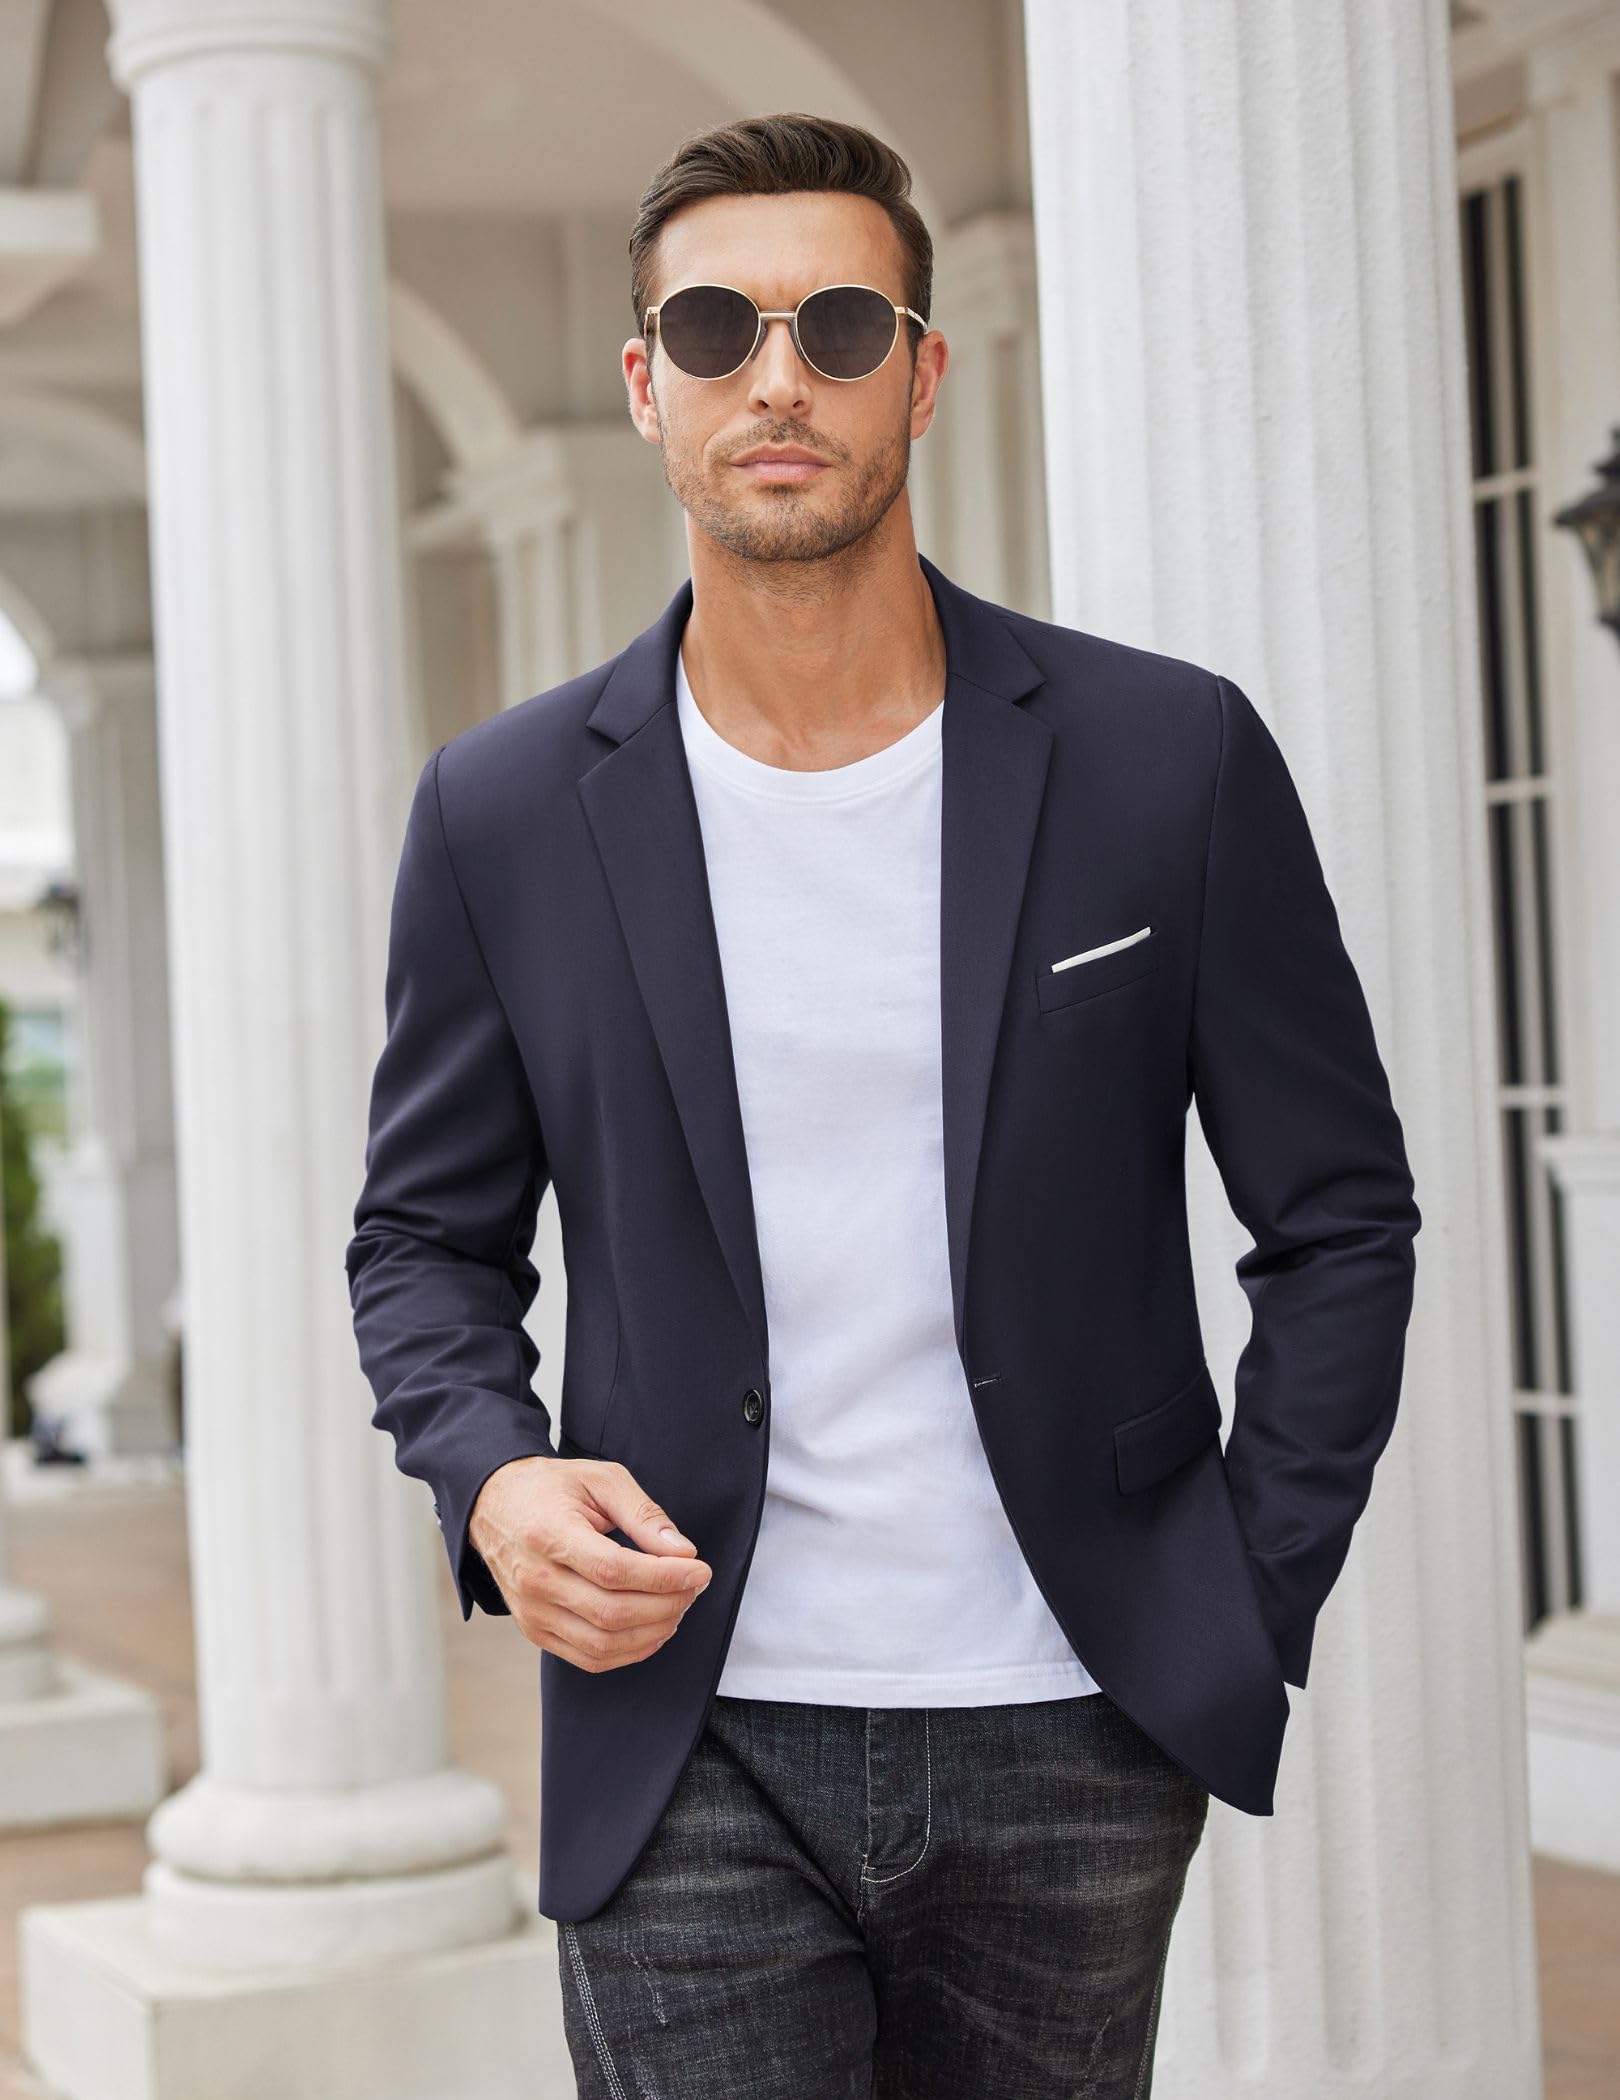 Men’s sport jacket – How to Choose the Right One for You插图4